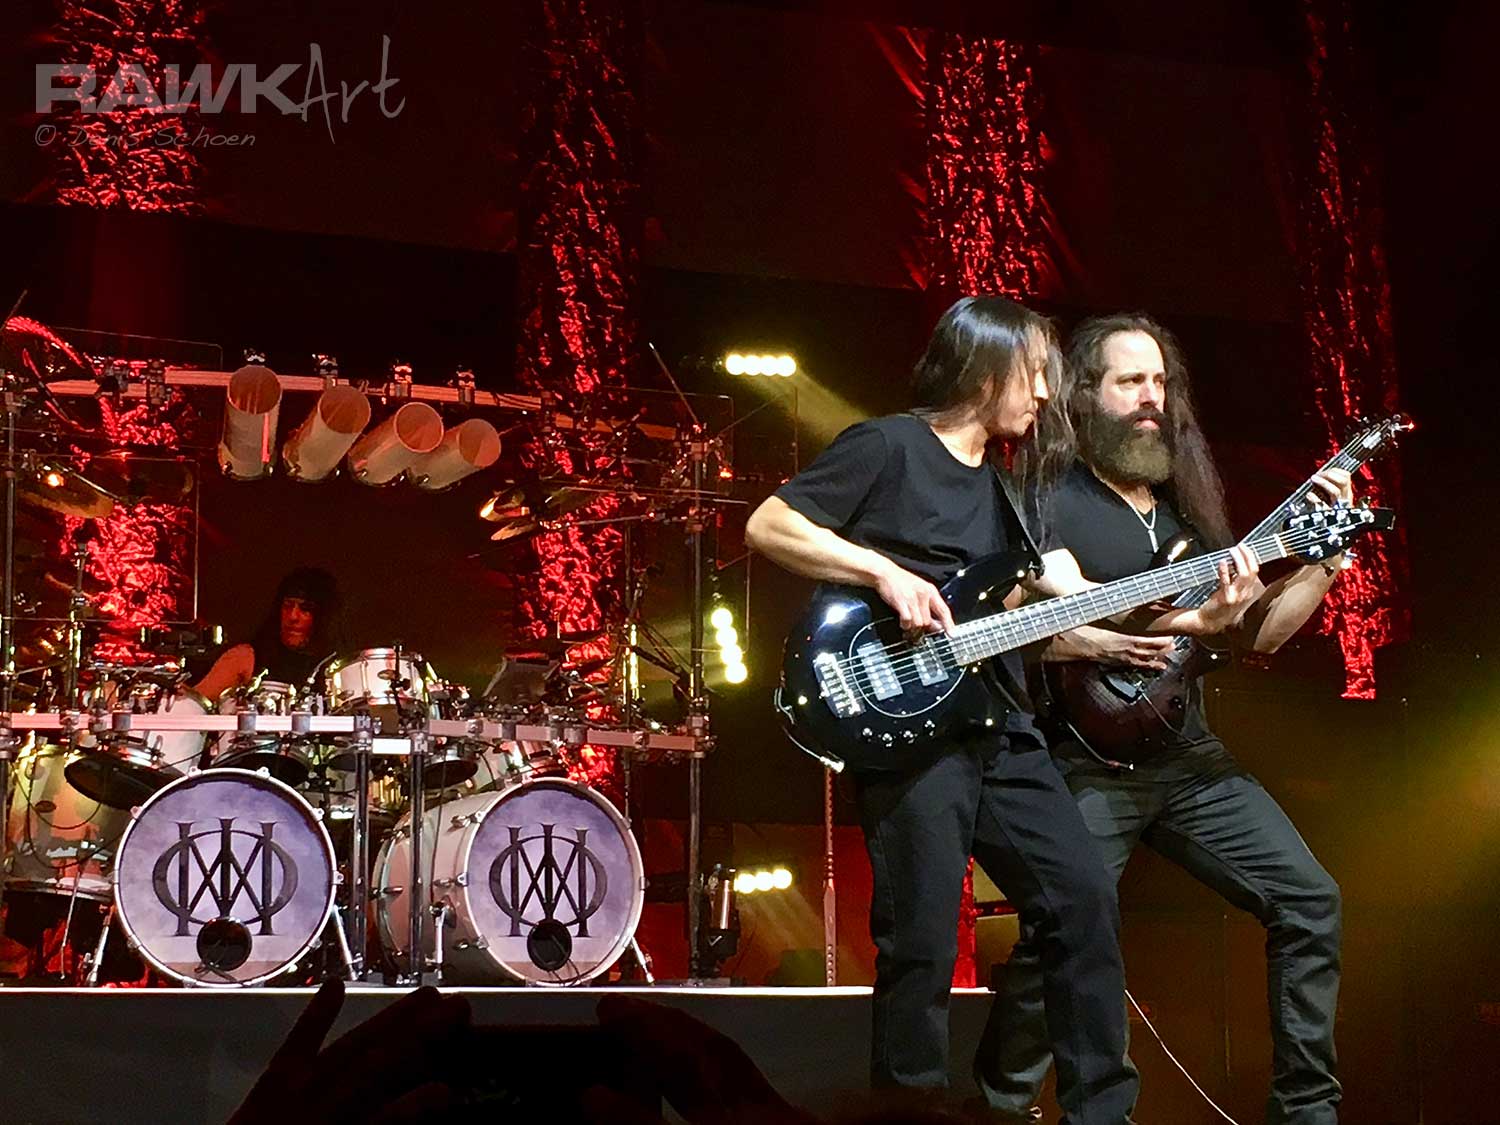 Dream Theater at Poppodium 013, Tilburg, Netherlands 2017, Images, Words & Beyond 25th Anniversary Tour